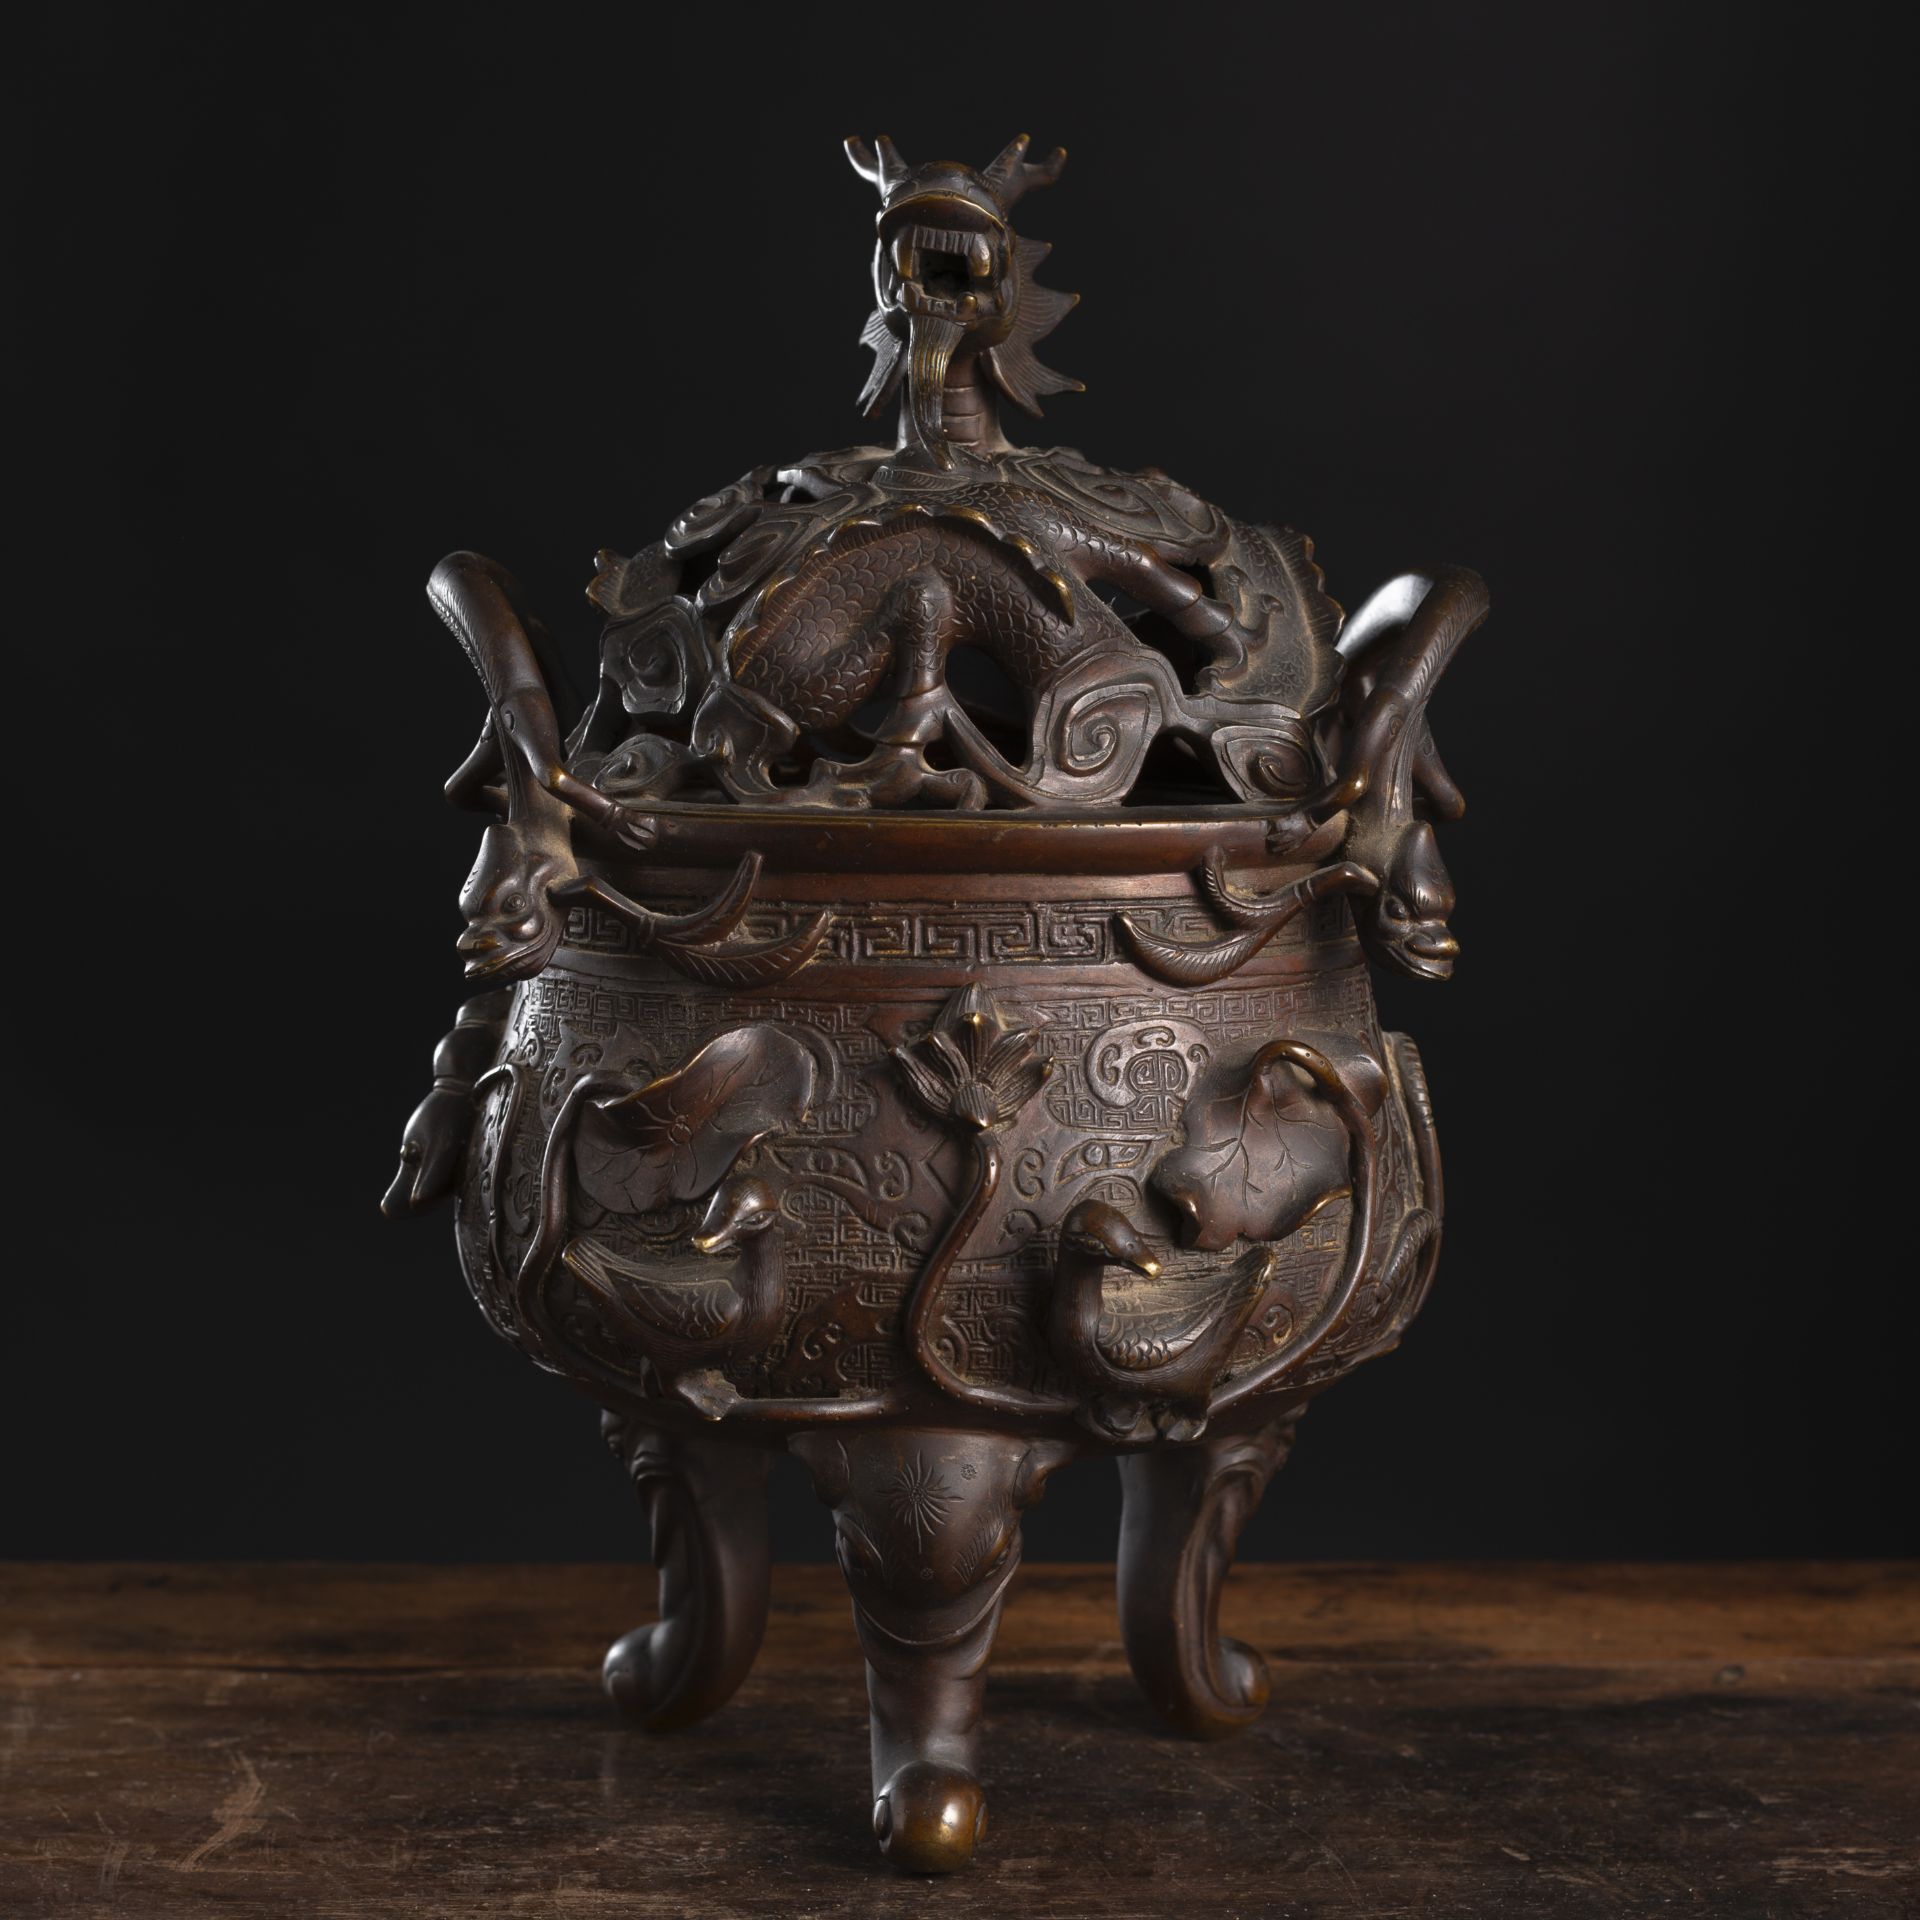 A GOOSE, HORSE, AND FISH RELIEF TRIPOD BRONZE CENSER AND OPENWORK DRAGON COVER